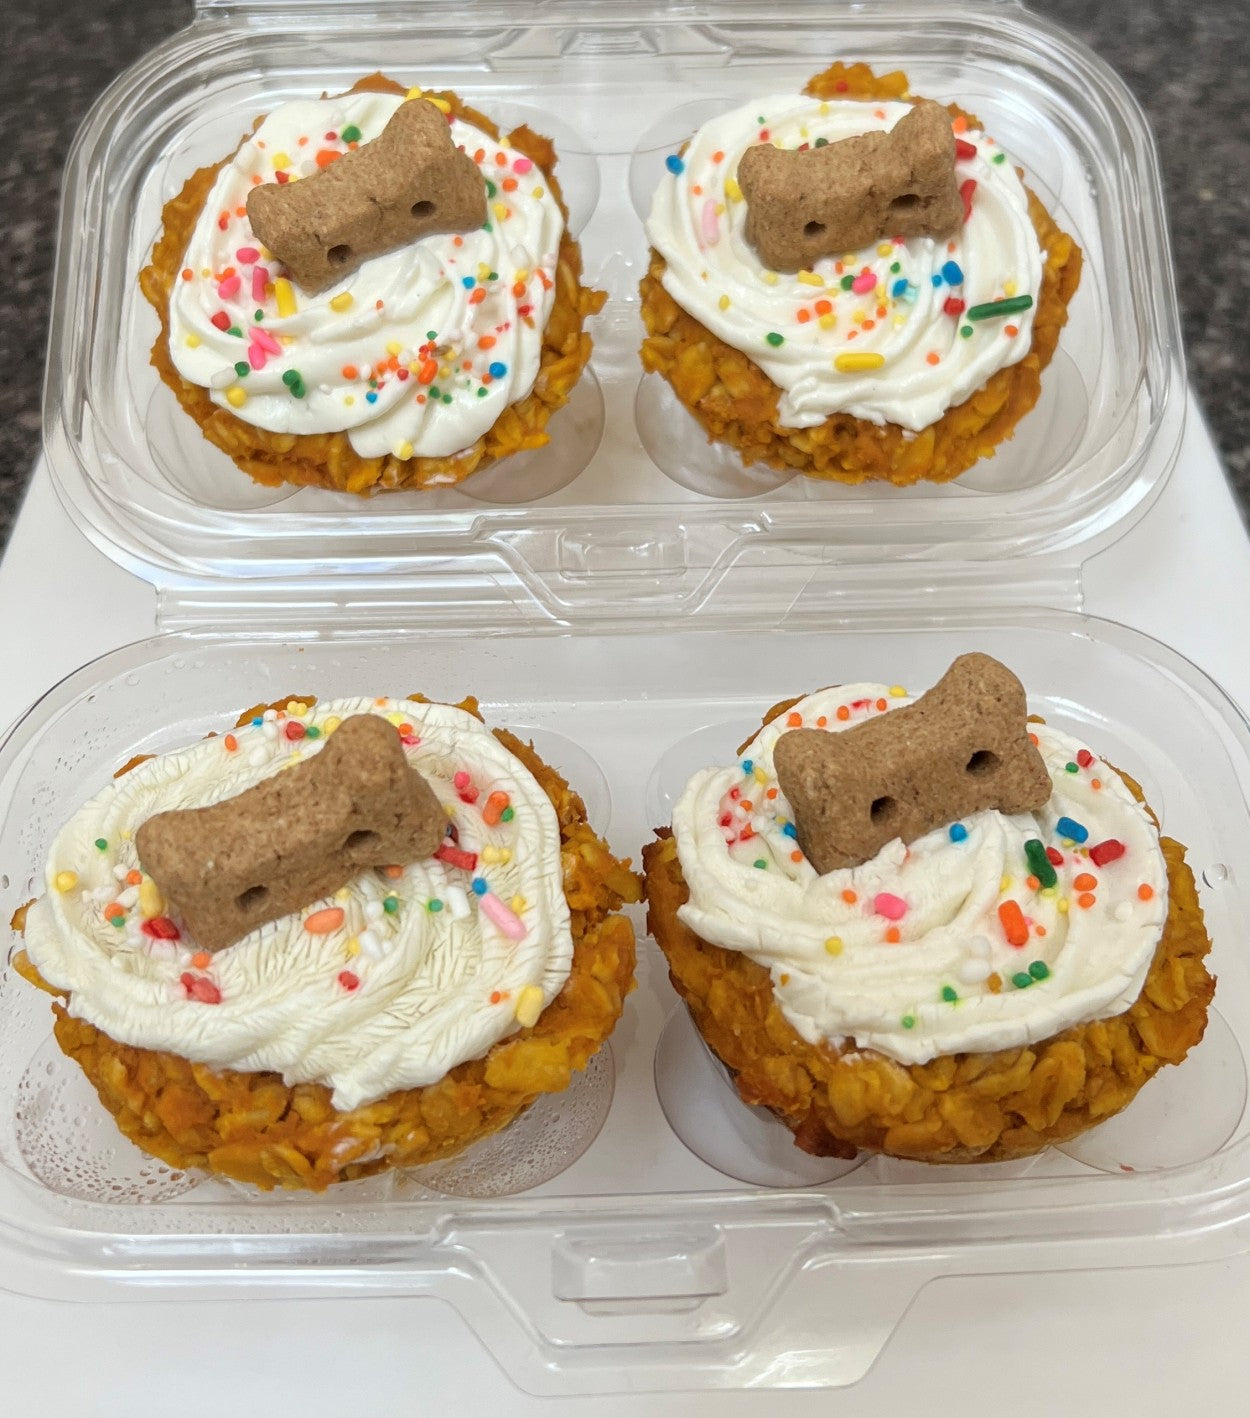 4 Pack - Buy 3 Get One Free - Large Pumpkin and Peanut Butter Pupcakes